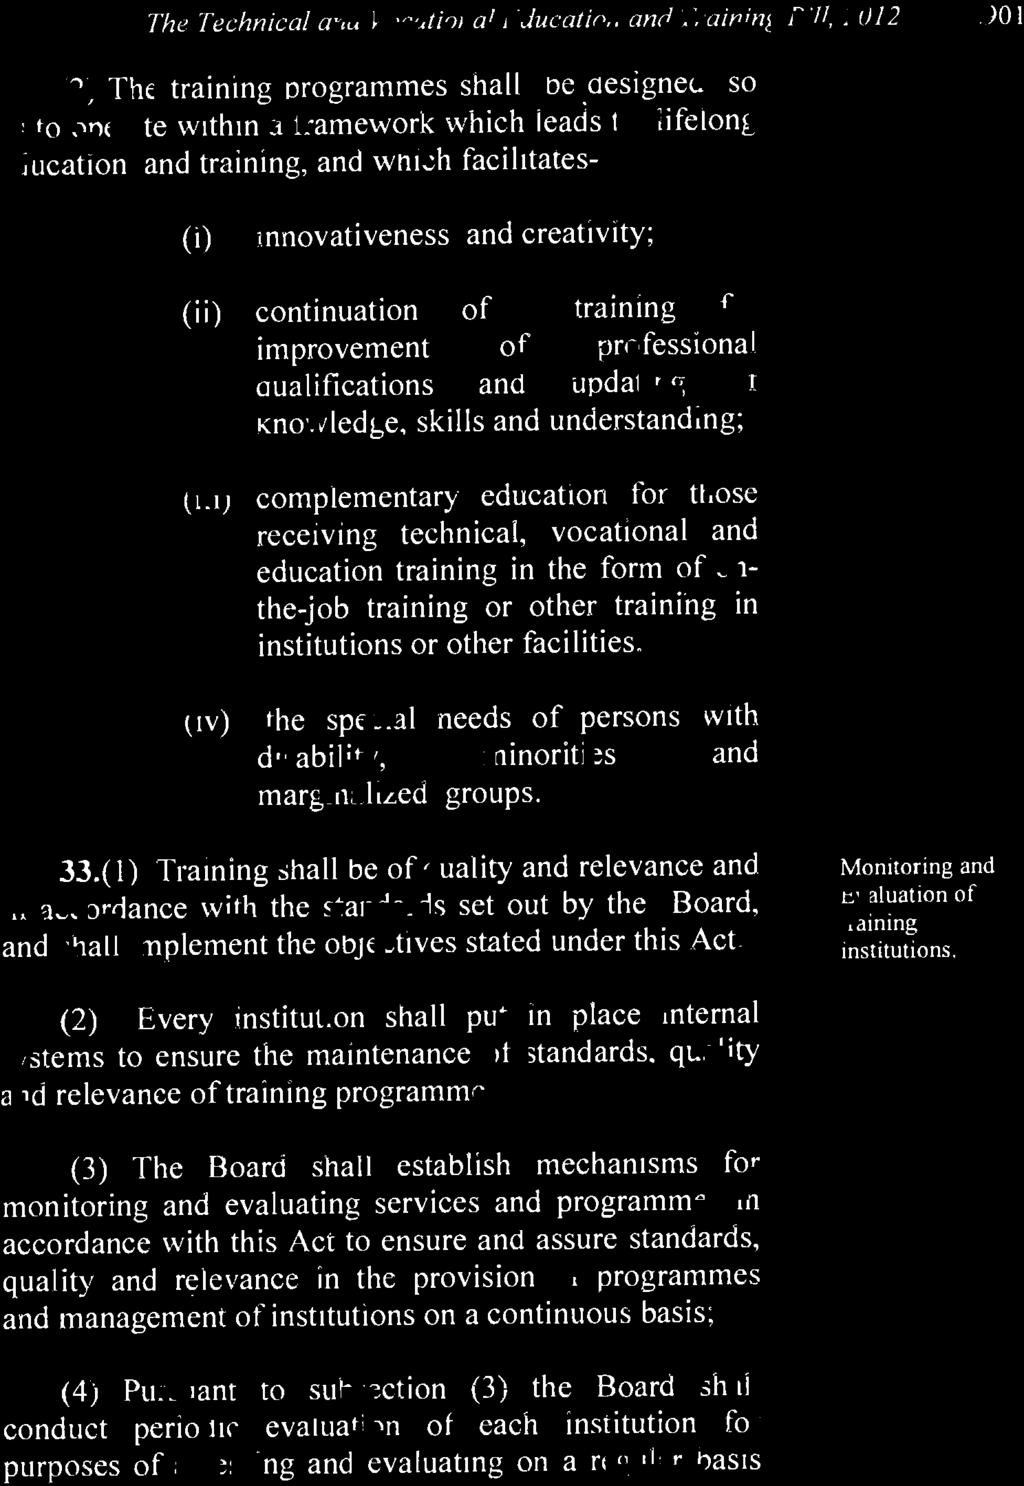 (l) Training shall be of quality and relevance and in accordance with the standards set out by the Board, and shall implement the objectives stated under this Act.